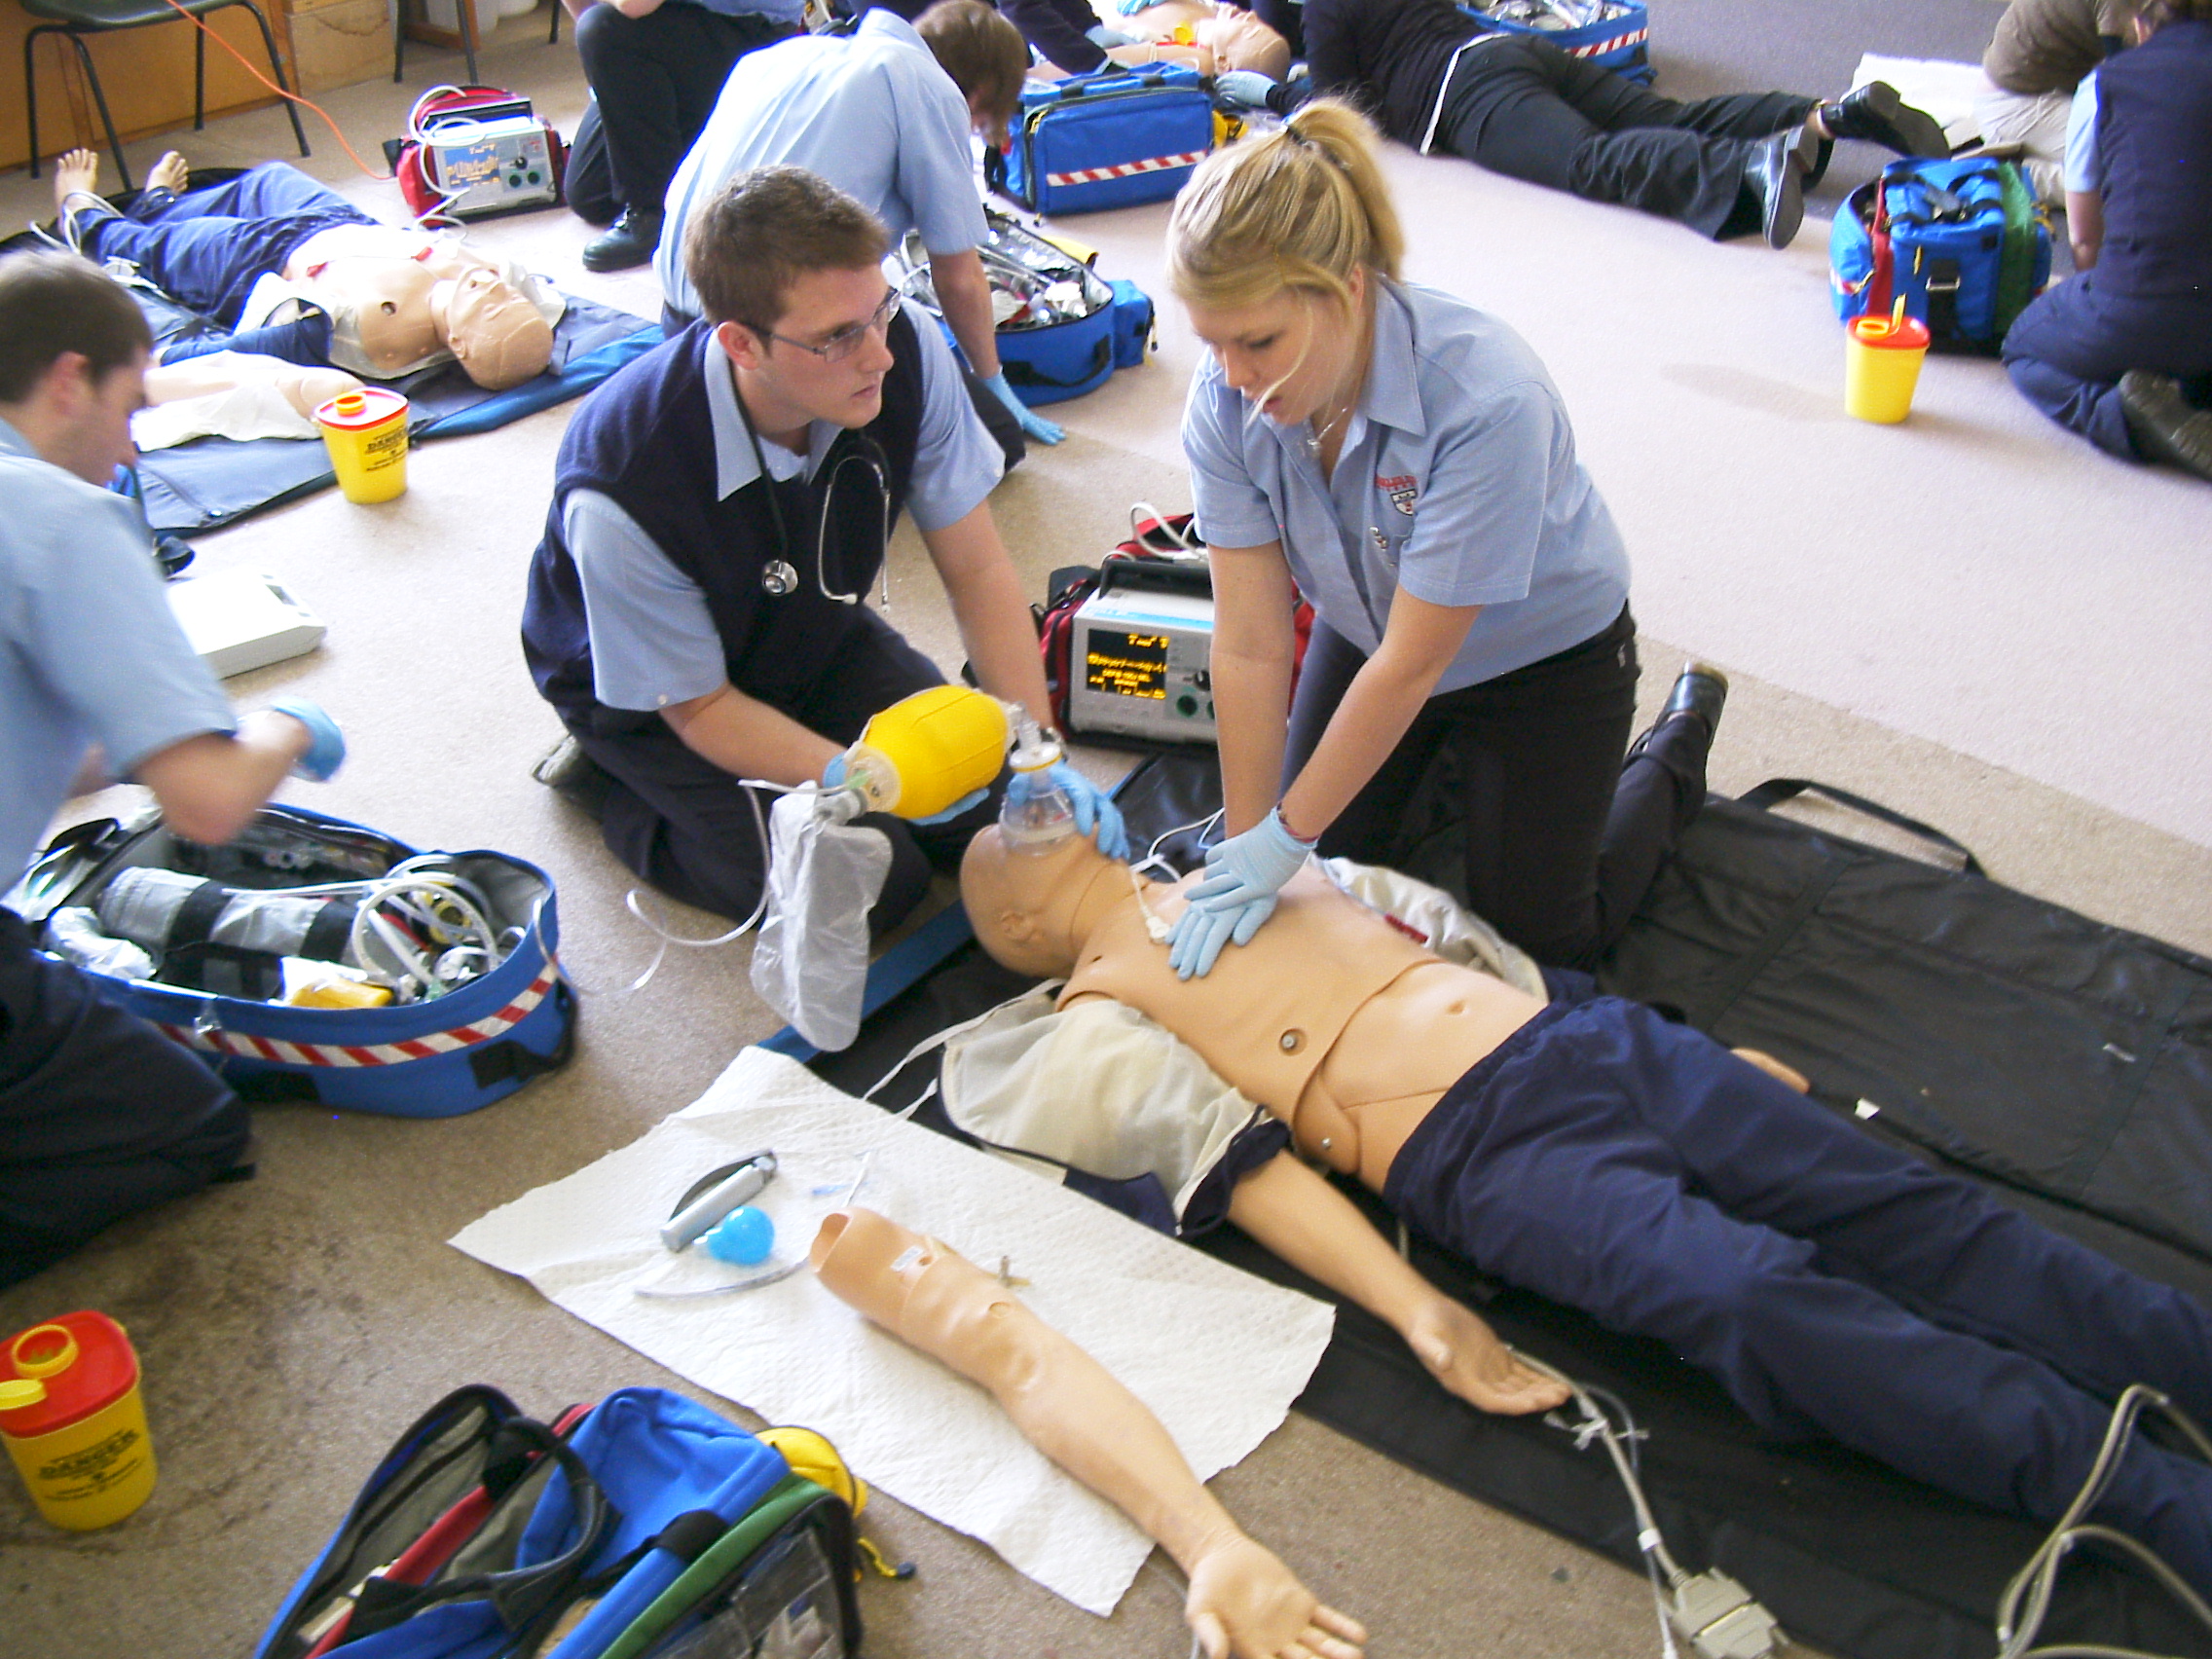 Paramedic Degree: The Benefits of Hands-on Learning